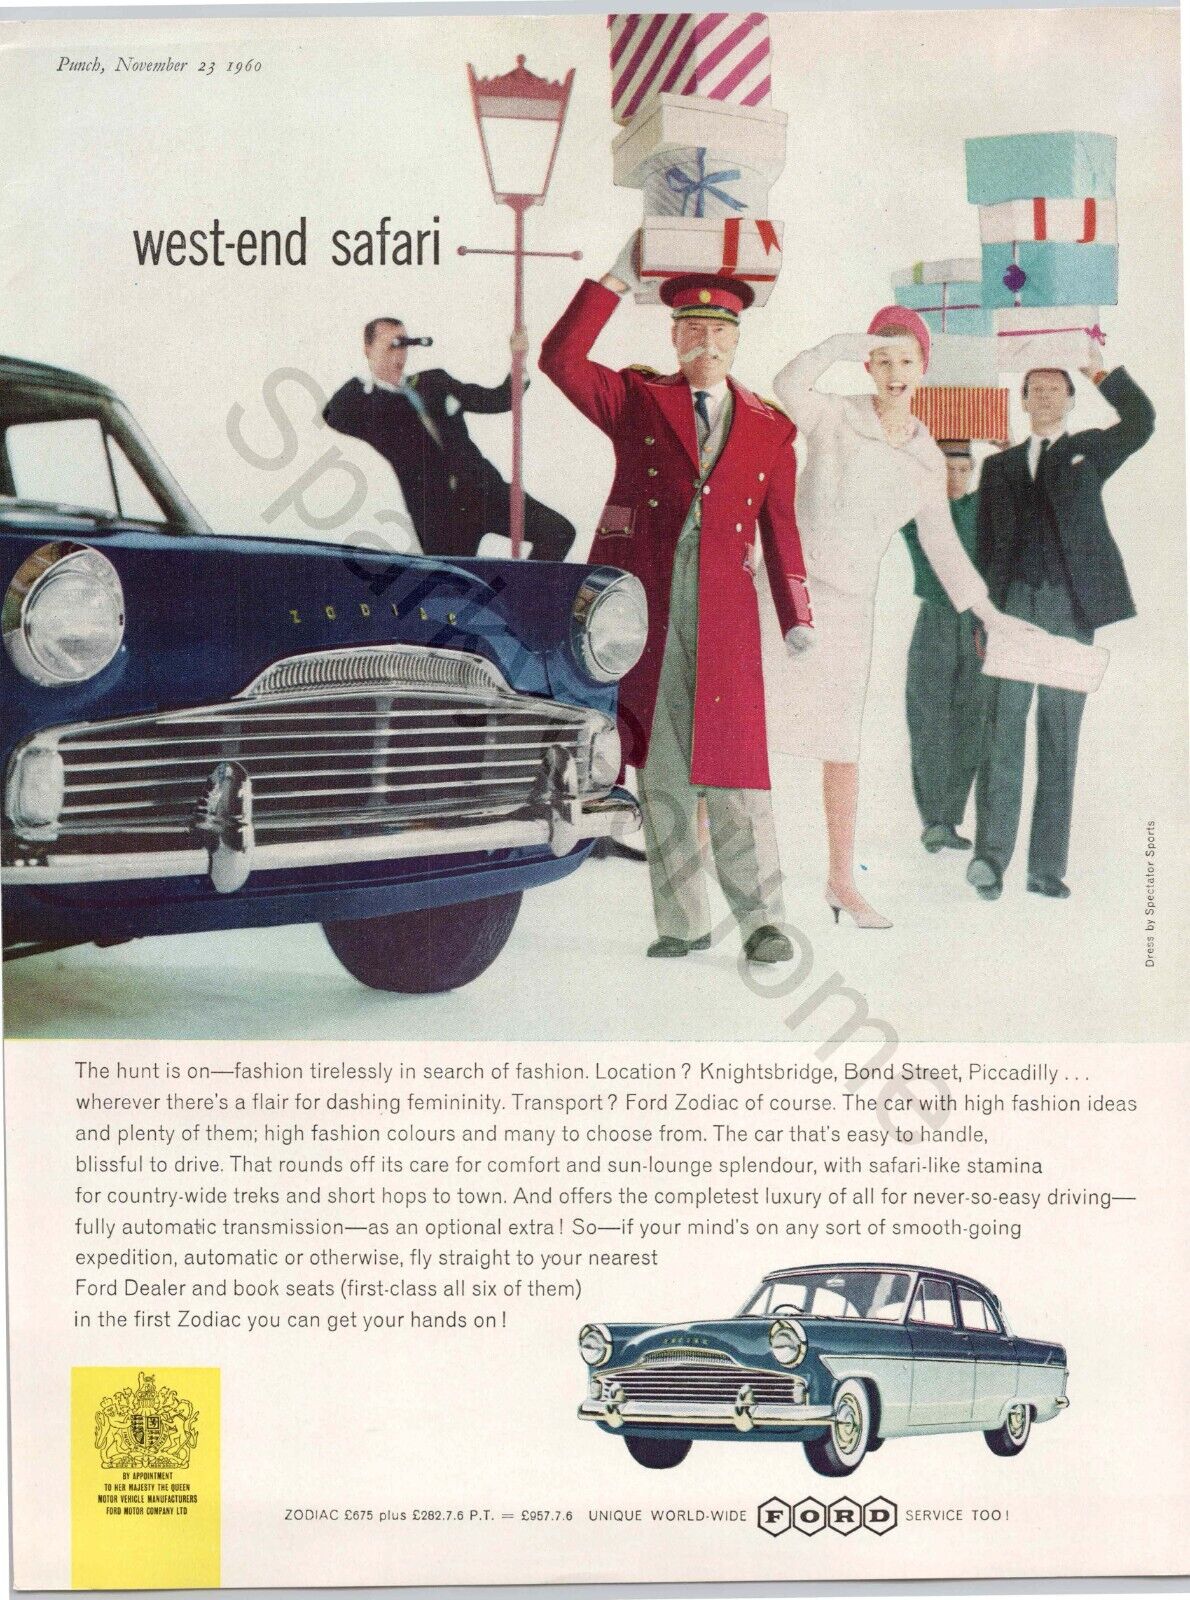 FORD ZODIAC Car First One Available in UK Print Ad 1960 Price in Pounds GREAT AD